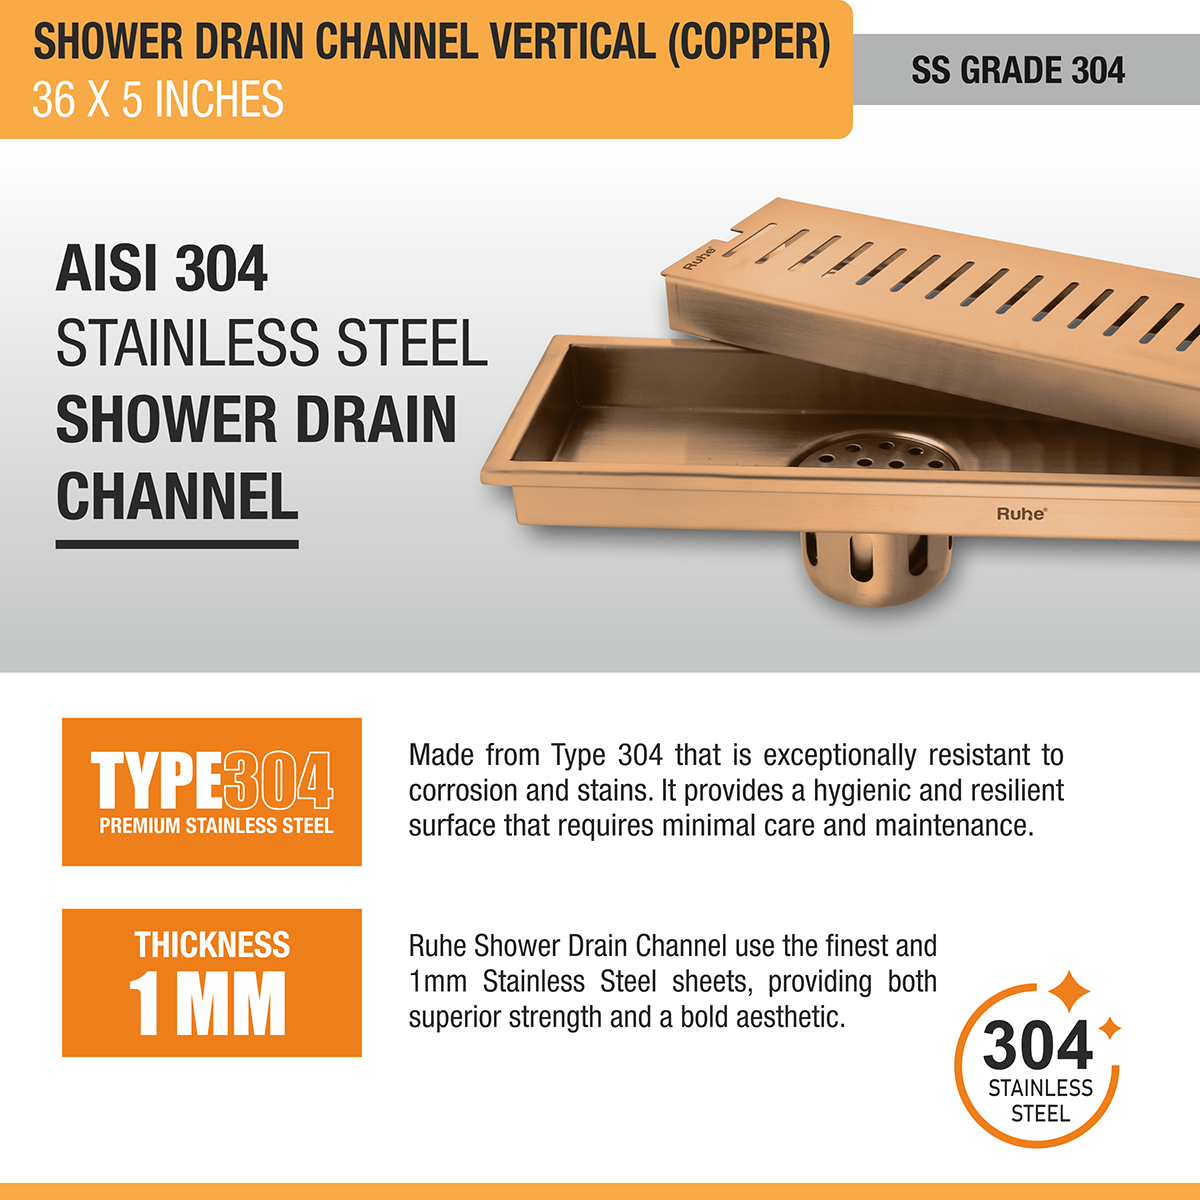 Vertical Shower Drain Channel (36 x 5 Inches) ROSE GOLD/ANTIQUE COPPER stainless steel